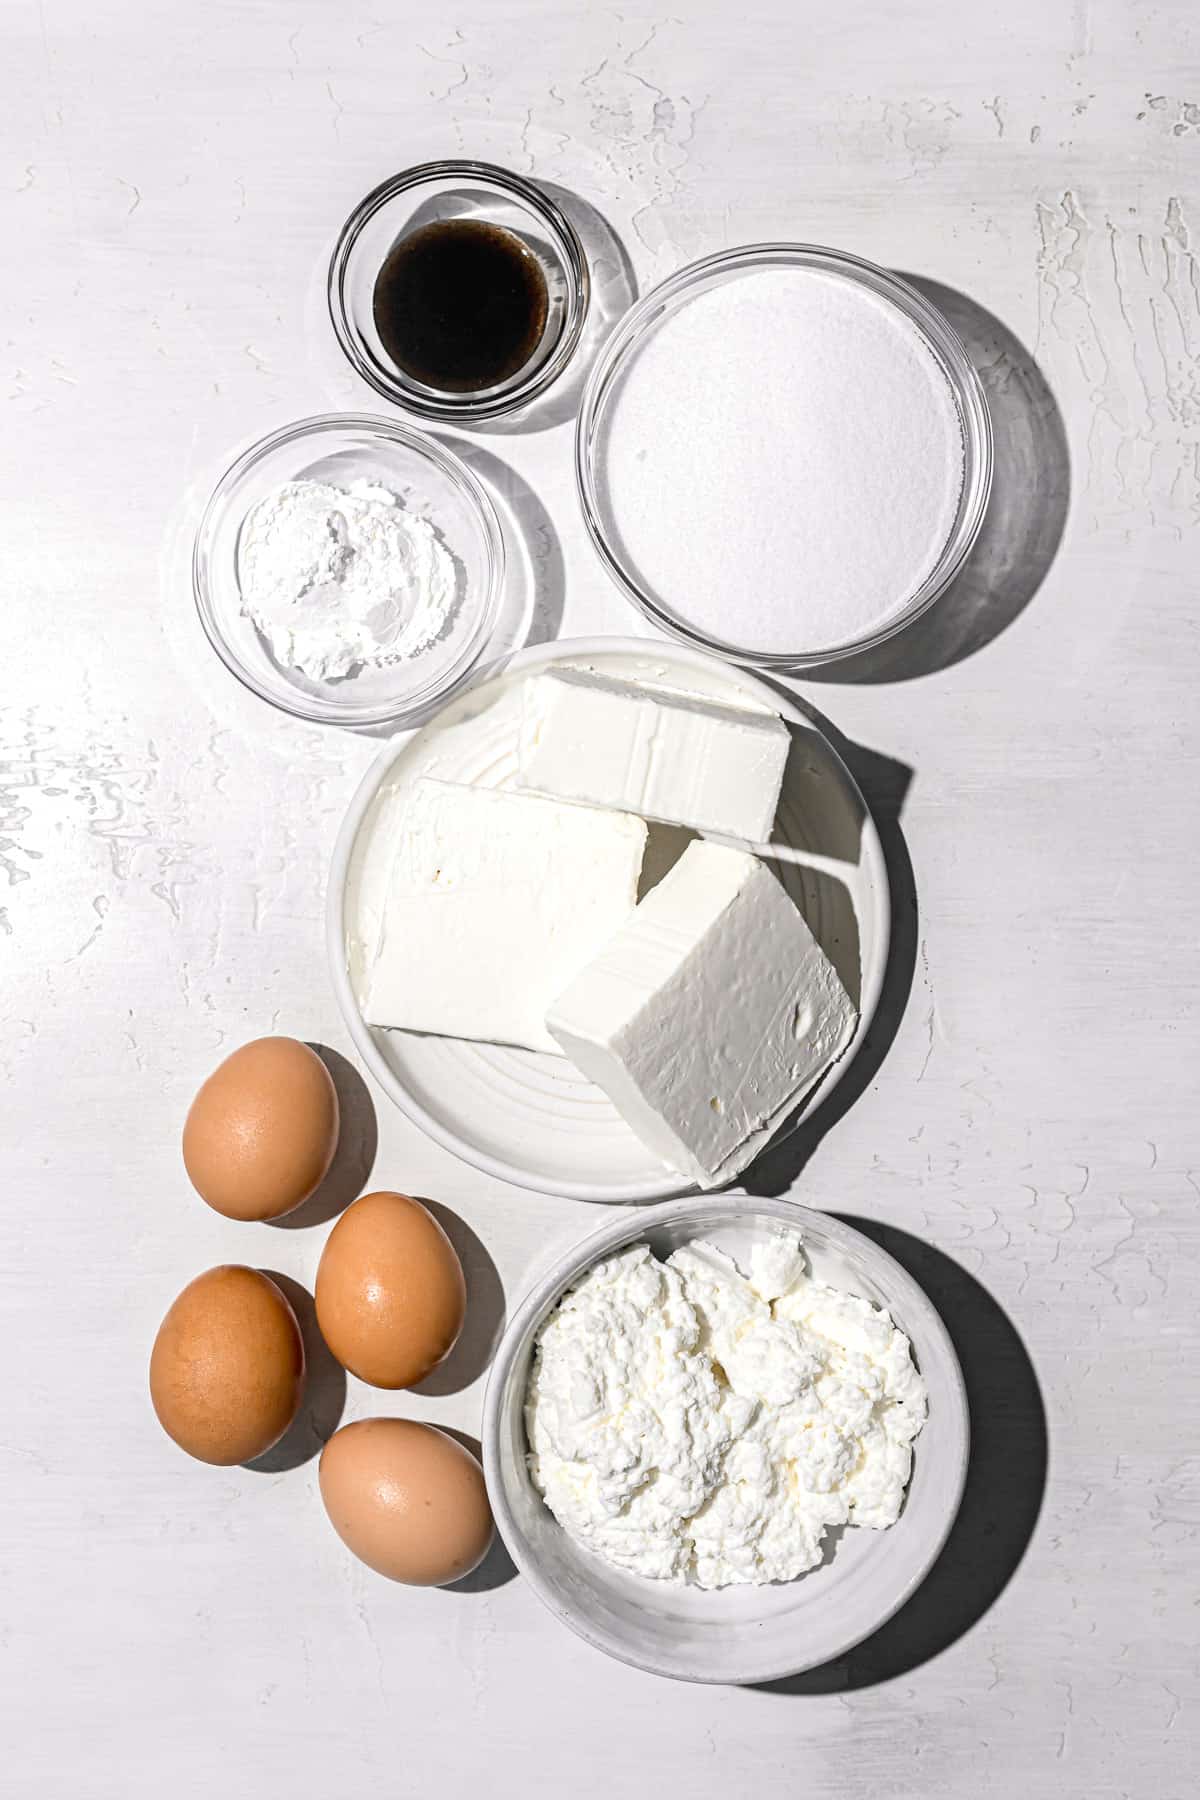 ingredients for sicilian cheesecake filling.